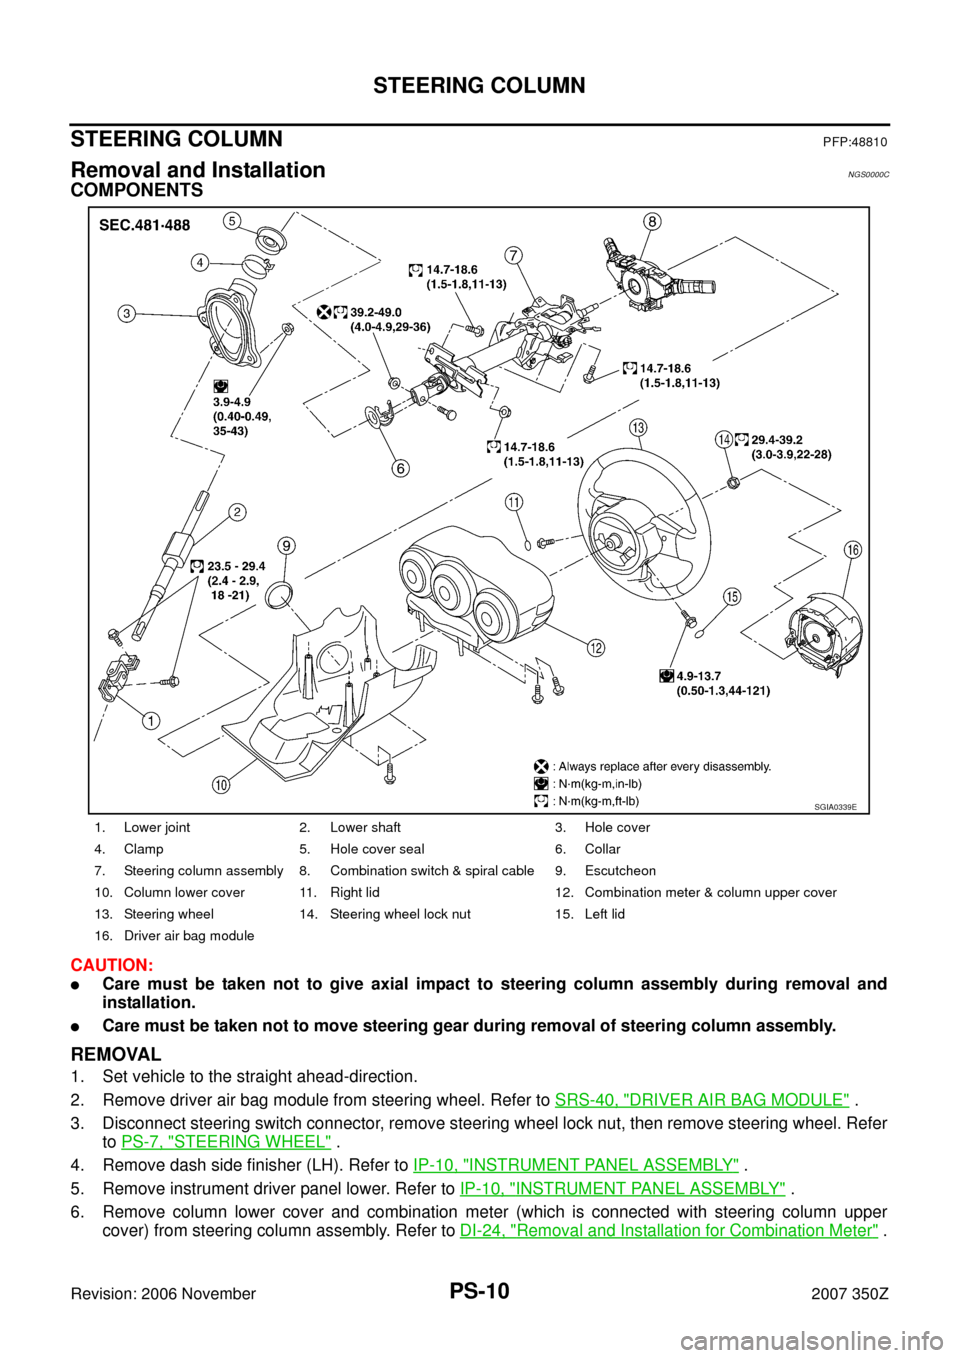 NISSAN 350Z 2007 Z33 Power Steering System Workshop Manual PS-10
STEERING COLUMN
Revision: 2006 November2007 350Z
STEERING COLUMNPFP:48810
Removal and InstallationNGS0000C
COMPONENTS
CAUTION:
Care must be taken not to give axial impact to steering column ass